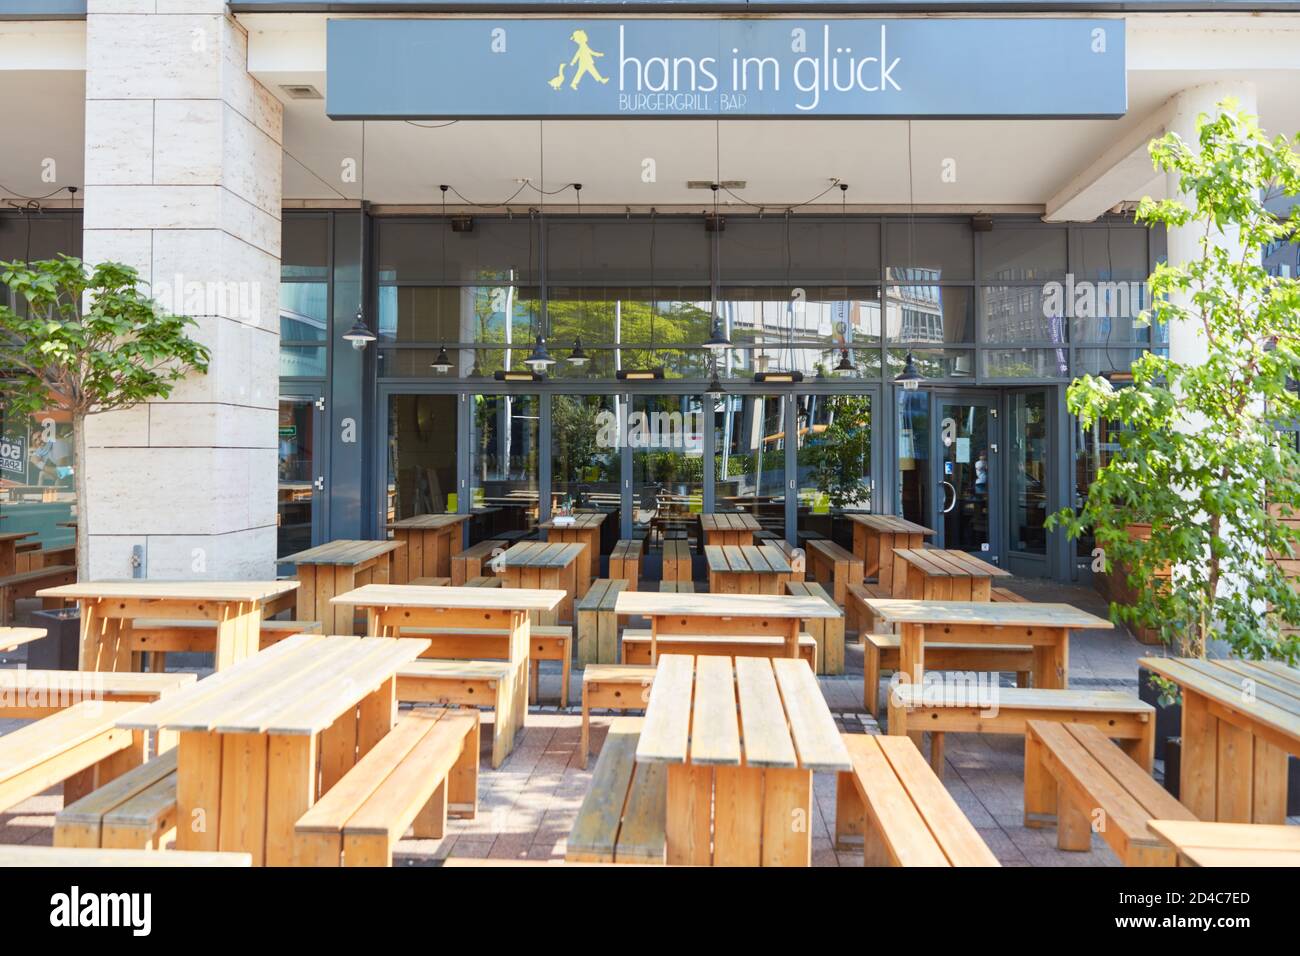 COLOGNE; May 2020: Closed Burger restaurant Hans im Glueck with benches outdoors Stock Photo